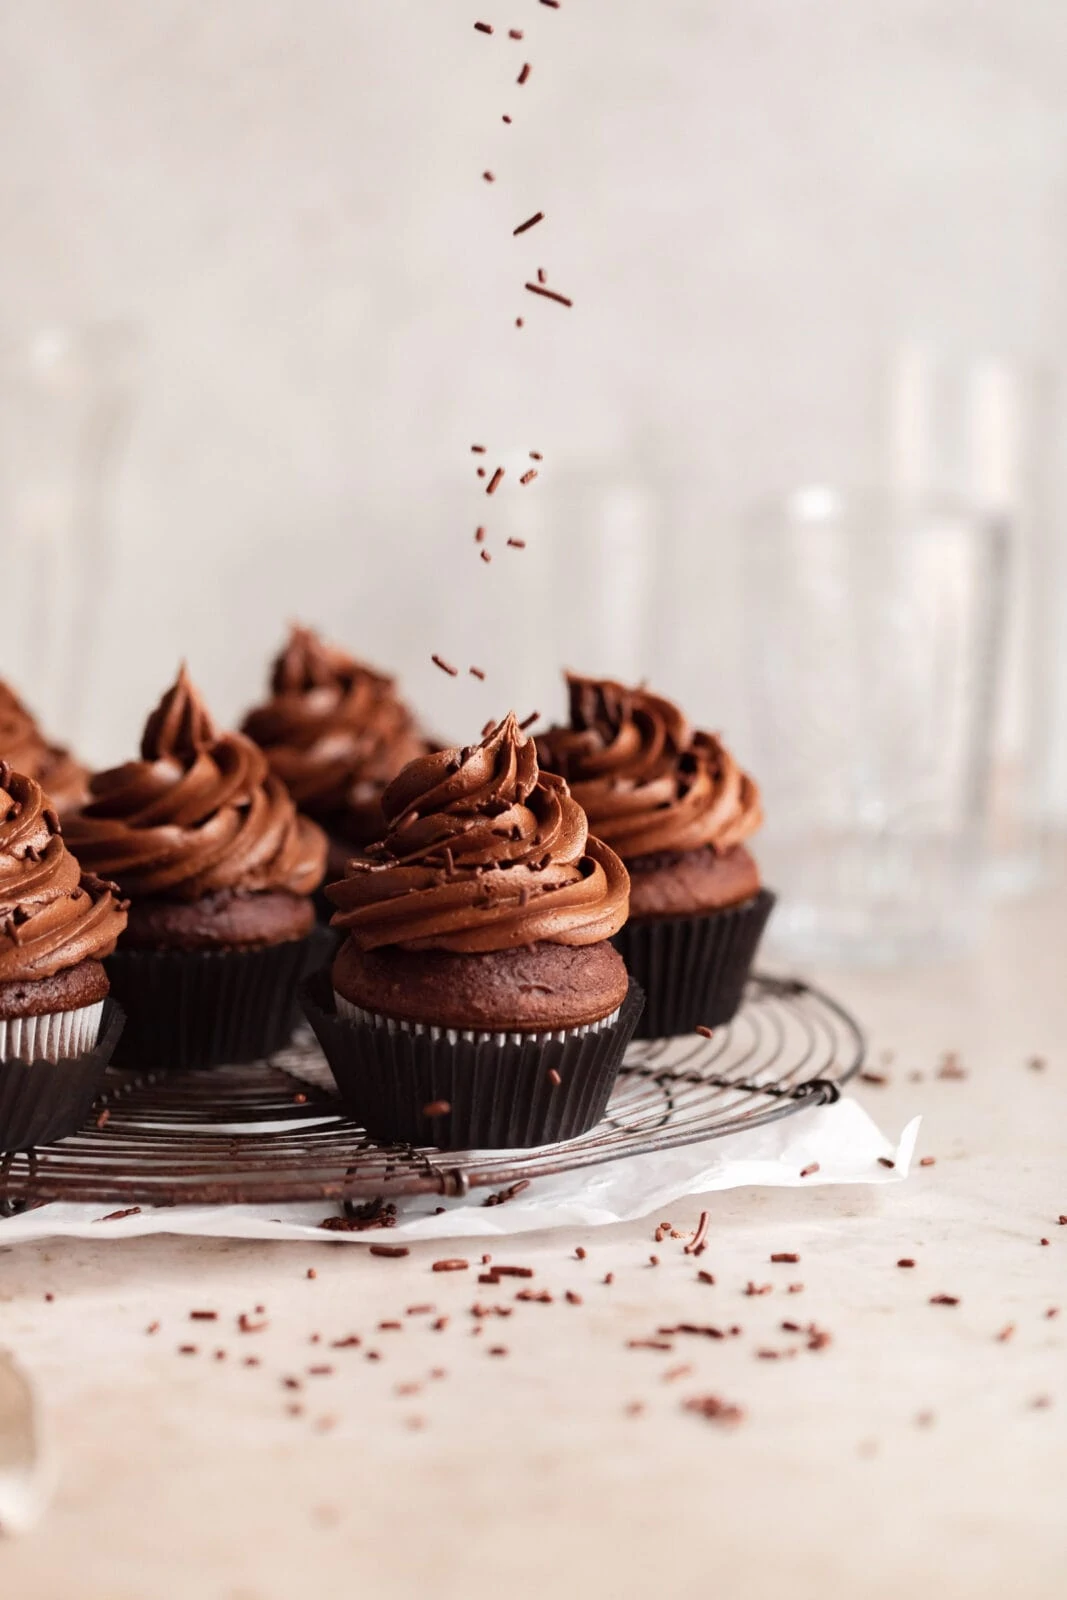 perfect chocolate cupcakes topped with chocolate buttercream